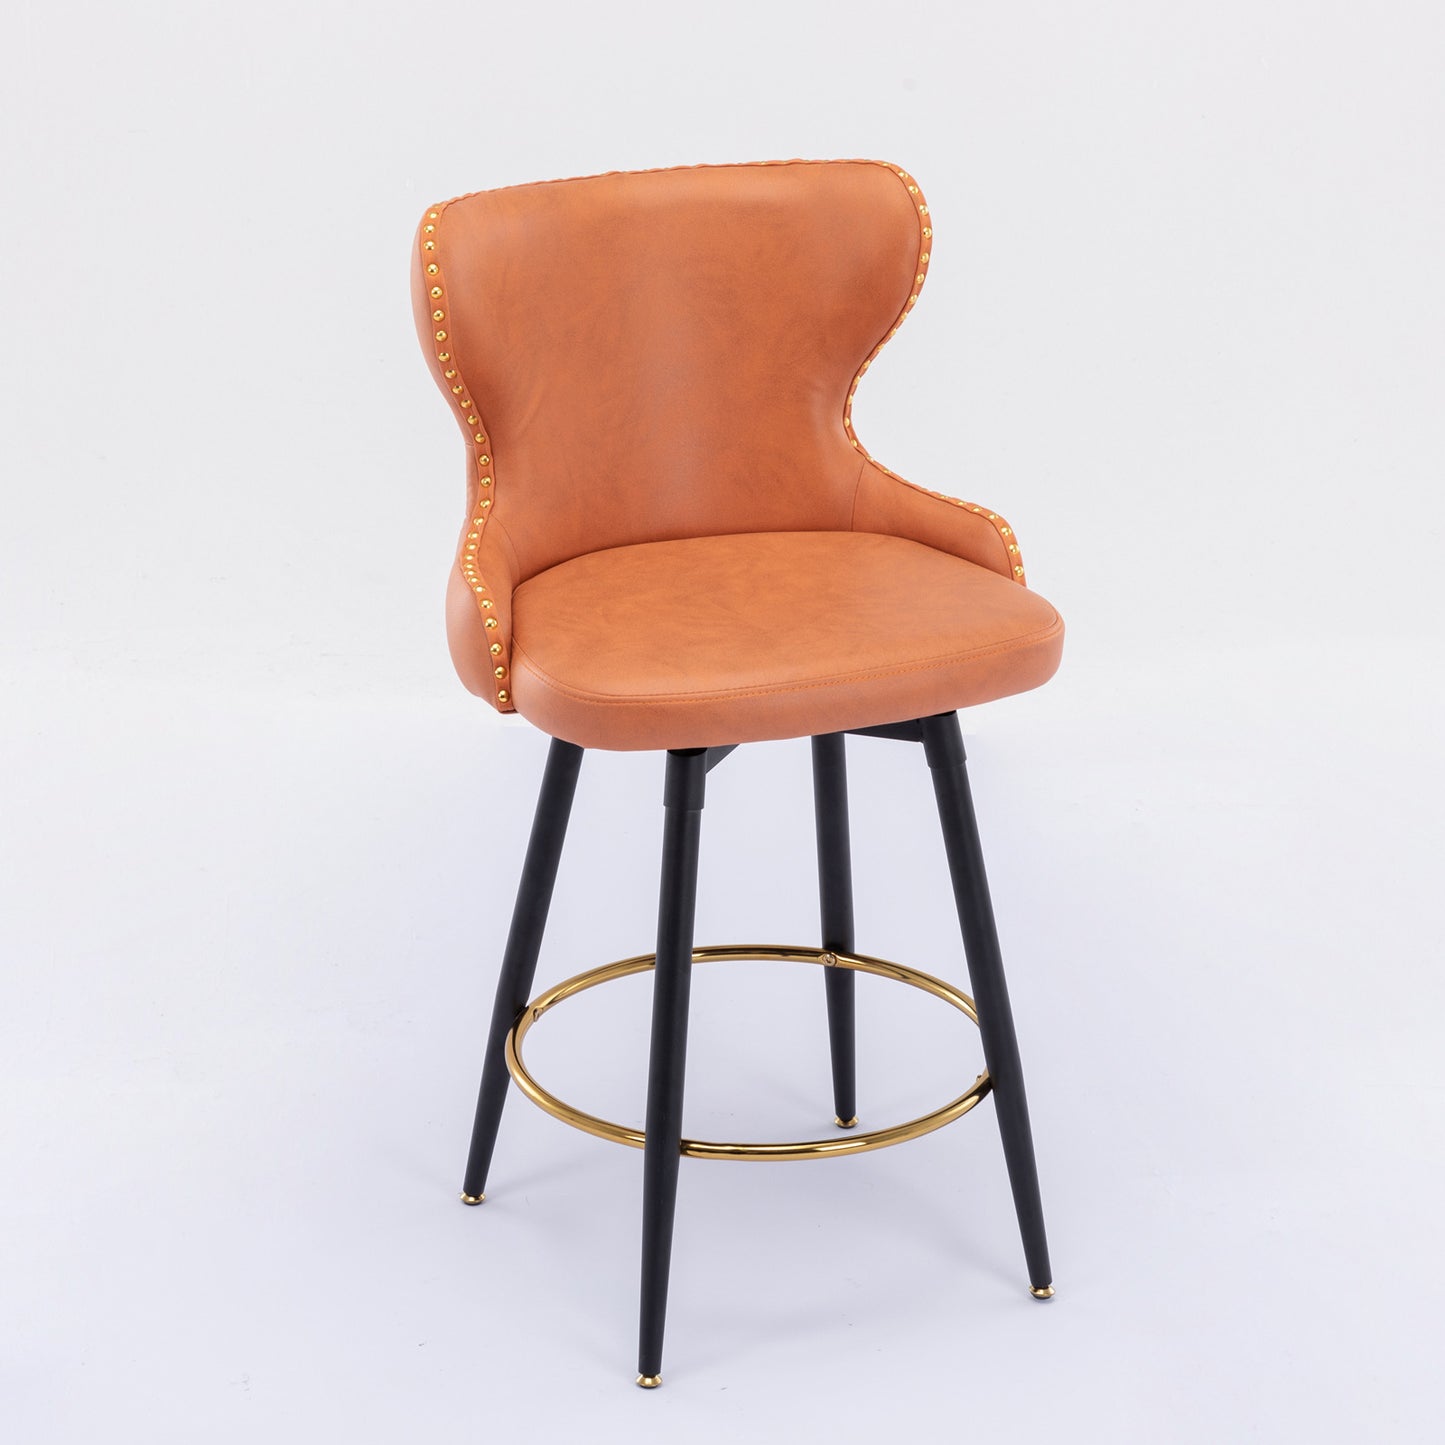 Counter Height 25" Modern Leathaire Fabric bar chairs, 180 degree Swivel Bar Stool Chair for Kitchen, Tufted Gold Nailhead Trim Bar Stools with Metal Legs, Set of 2 (Orange)